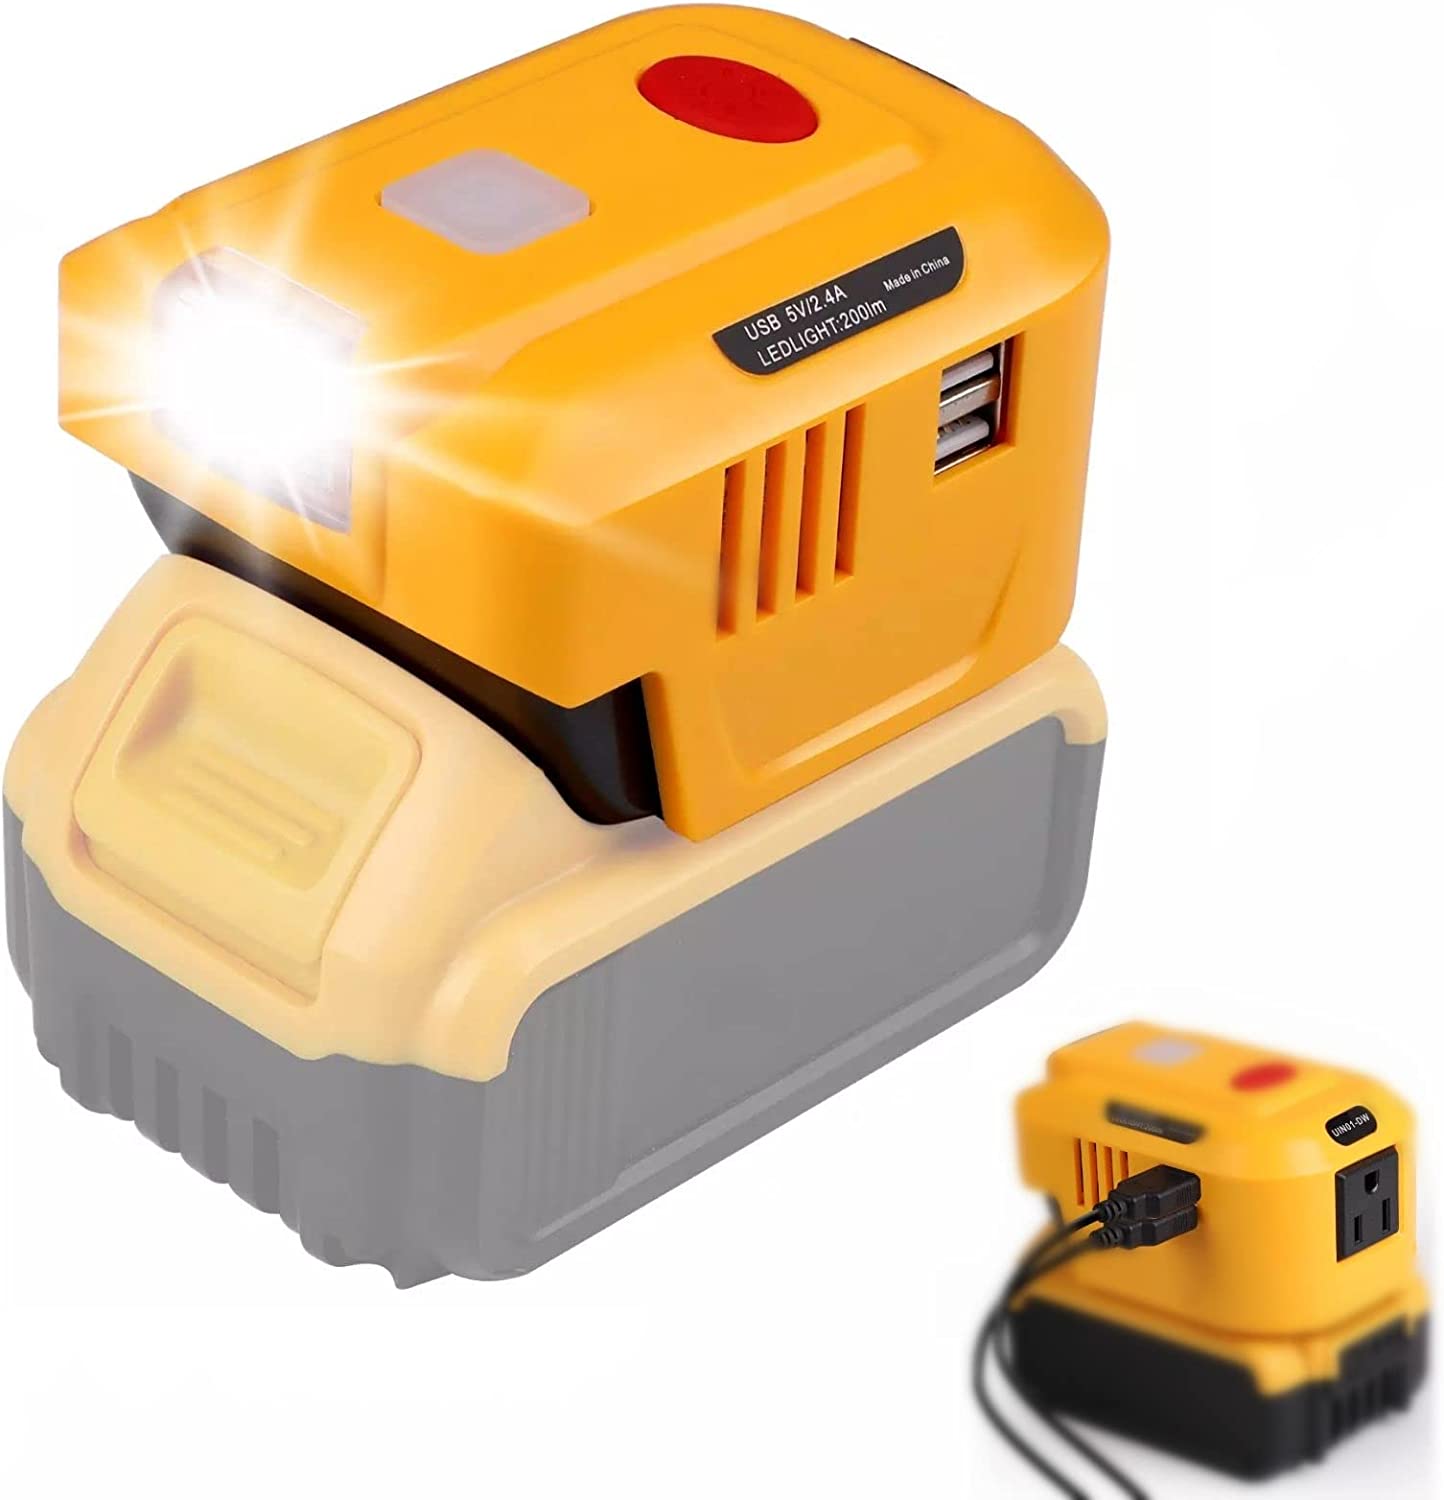 Revolutionary Battery Adapter for Power Tools: Everything You Need to Know